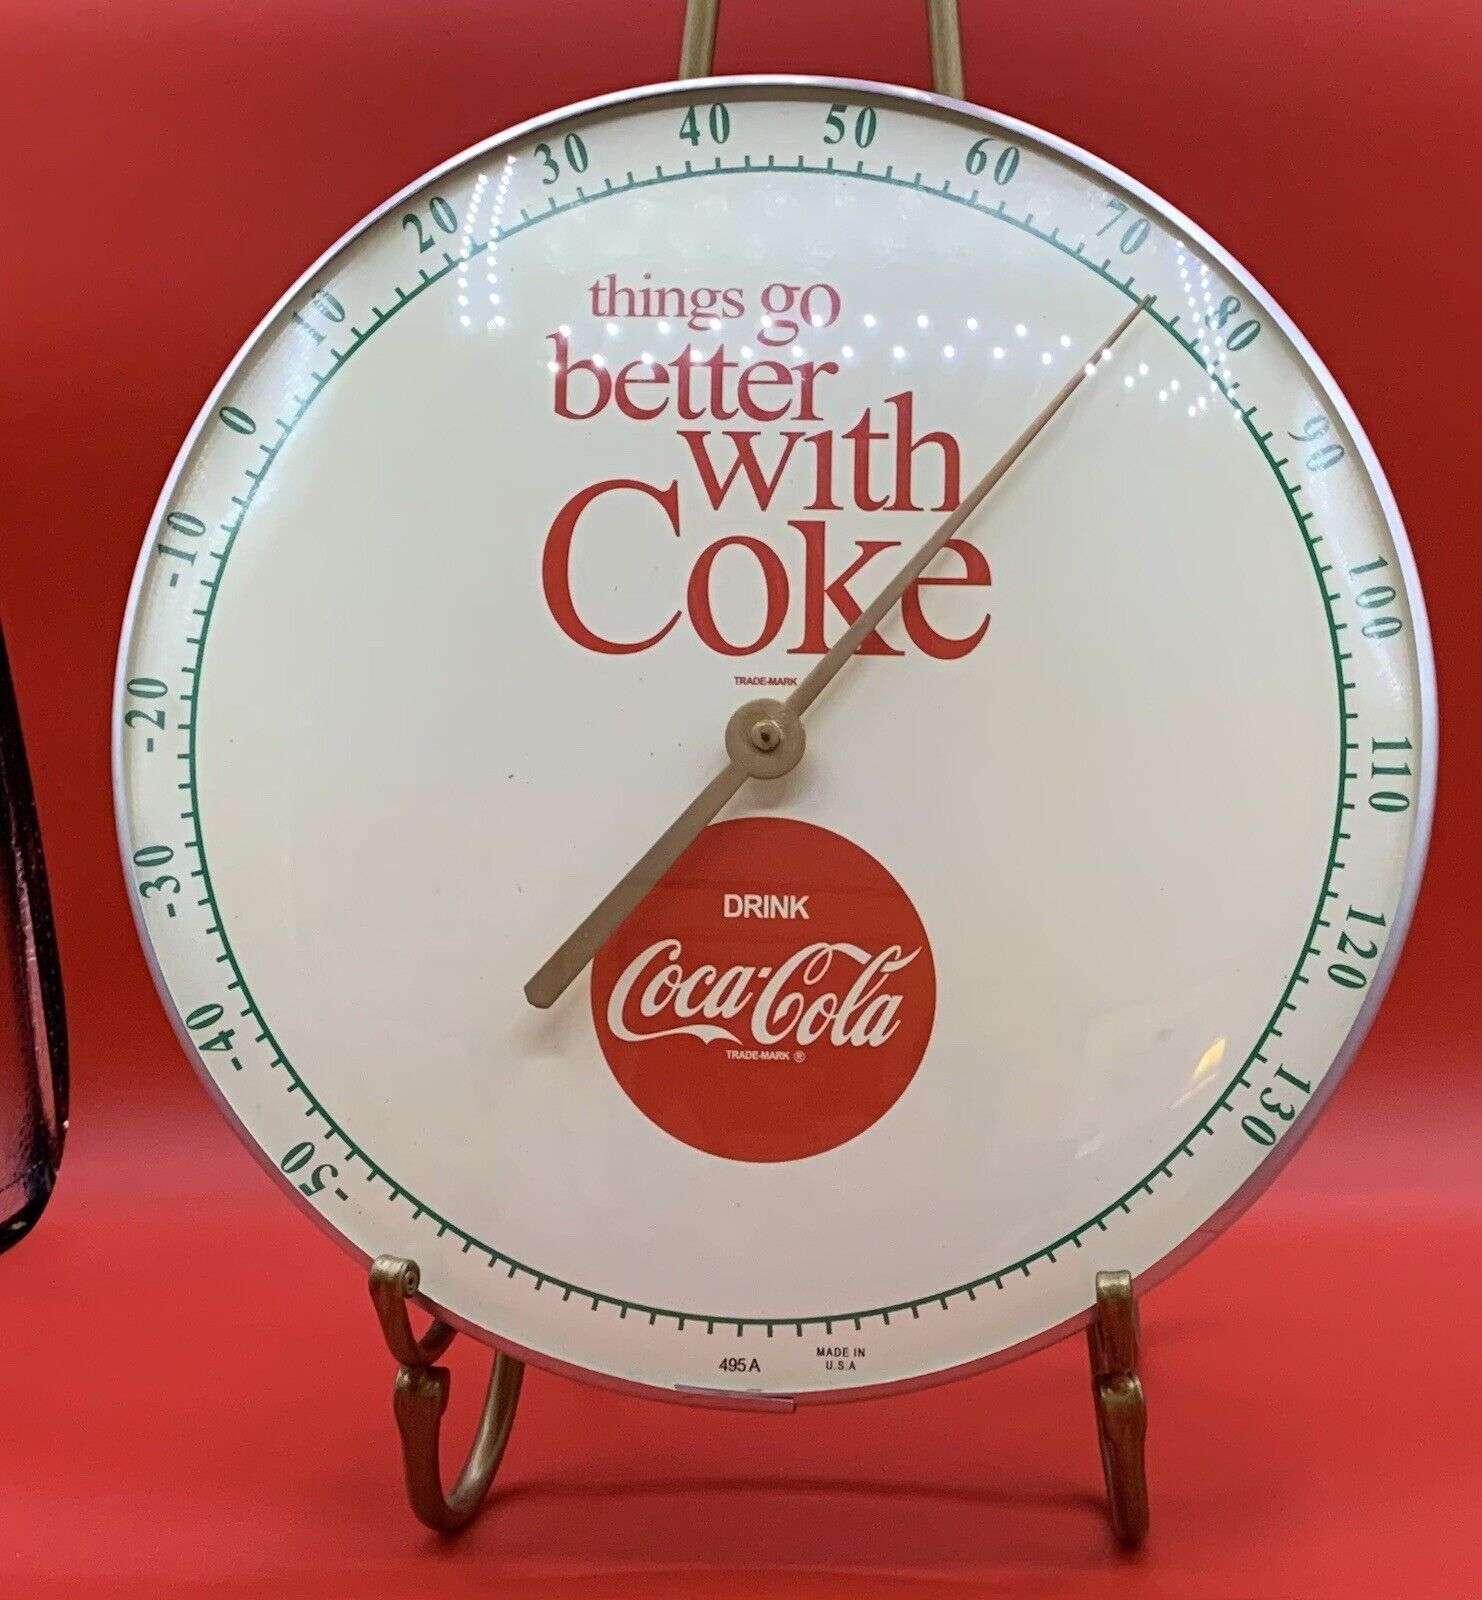 Things Go Better With Coke Drink Coca Cola